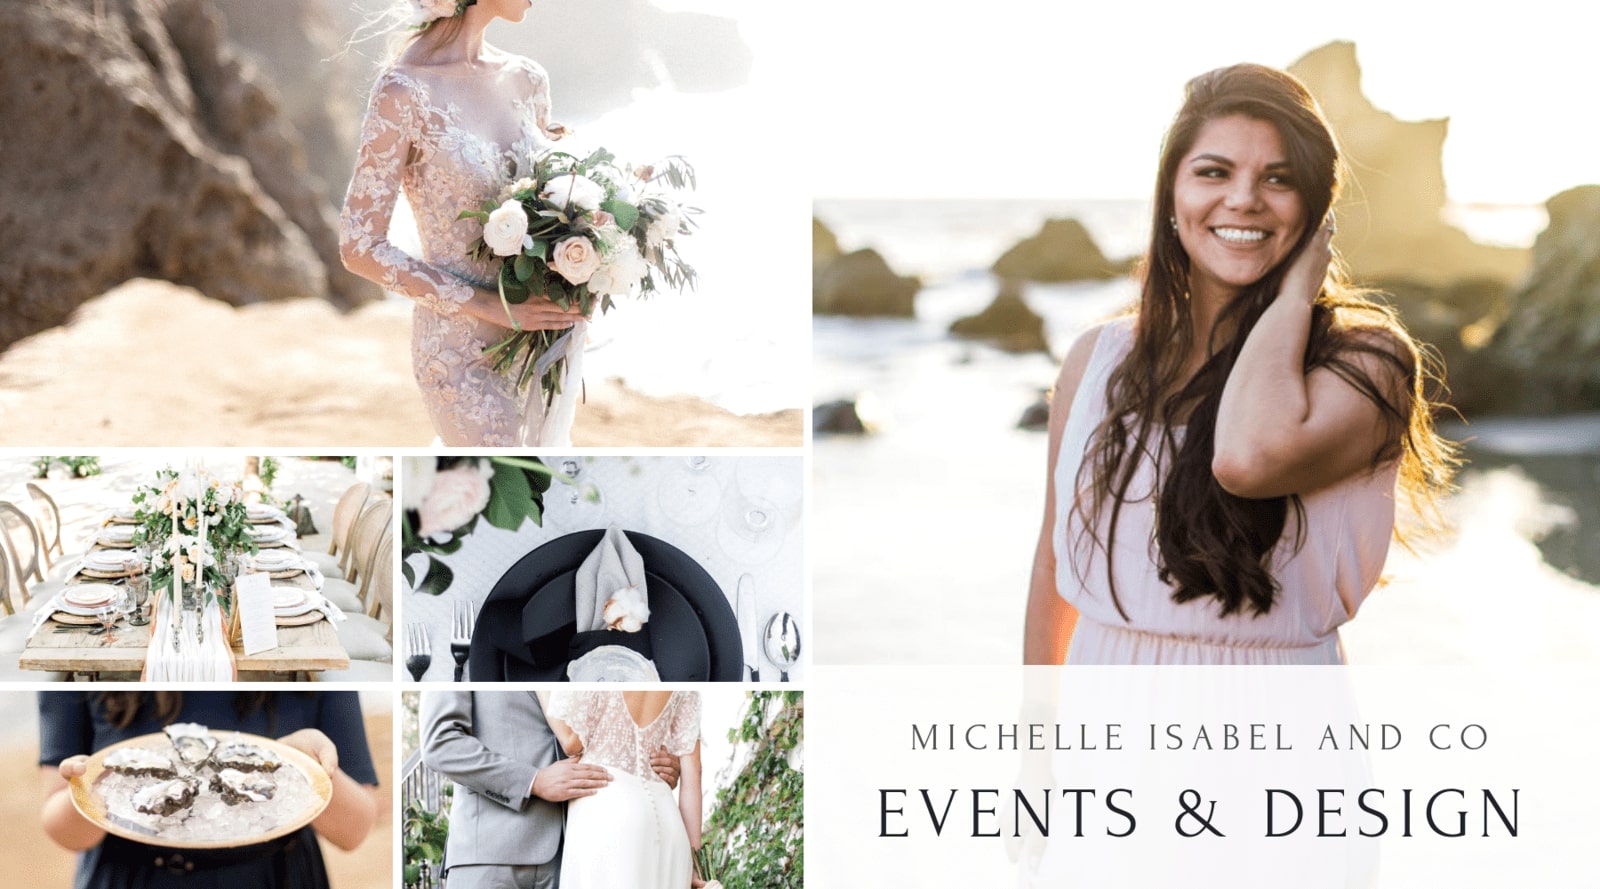 Today's Expert: Michelle Isabel & Co Events & Design